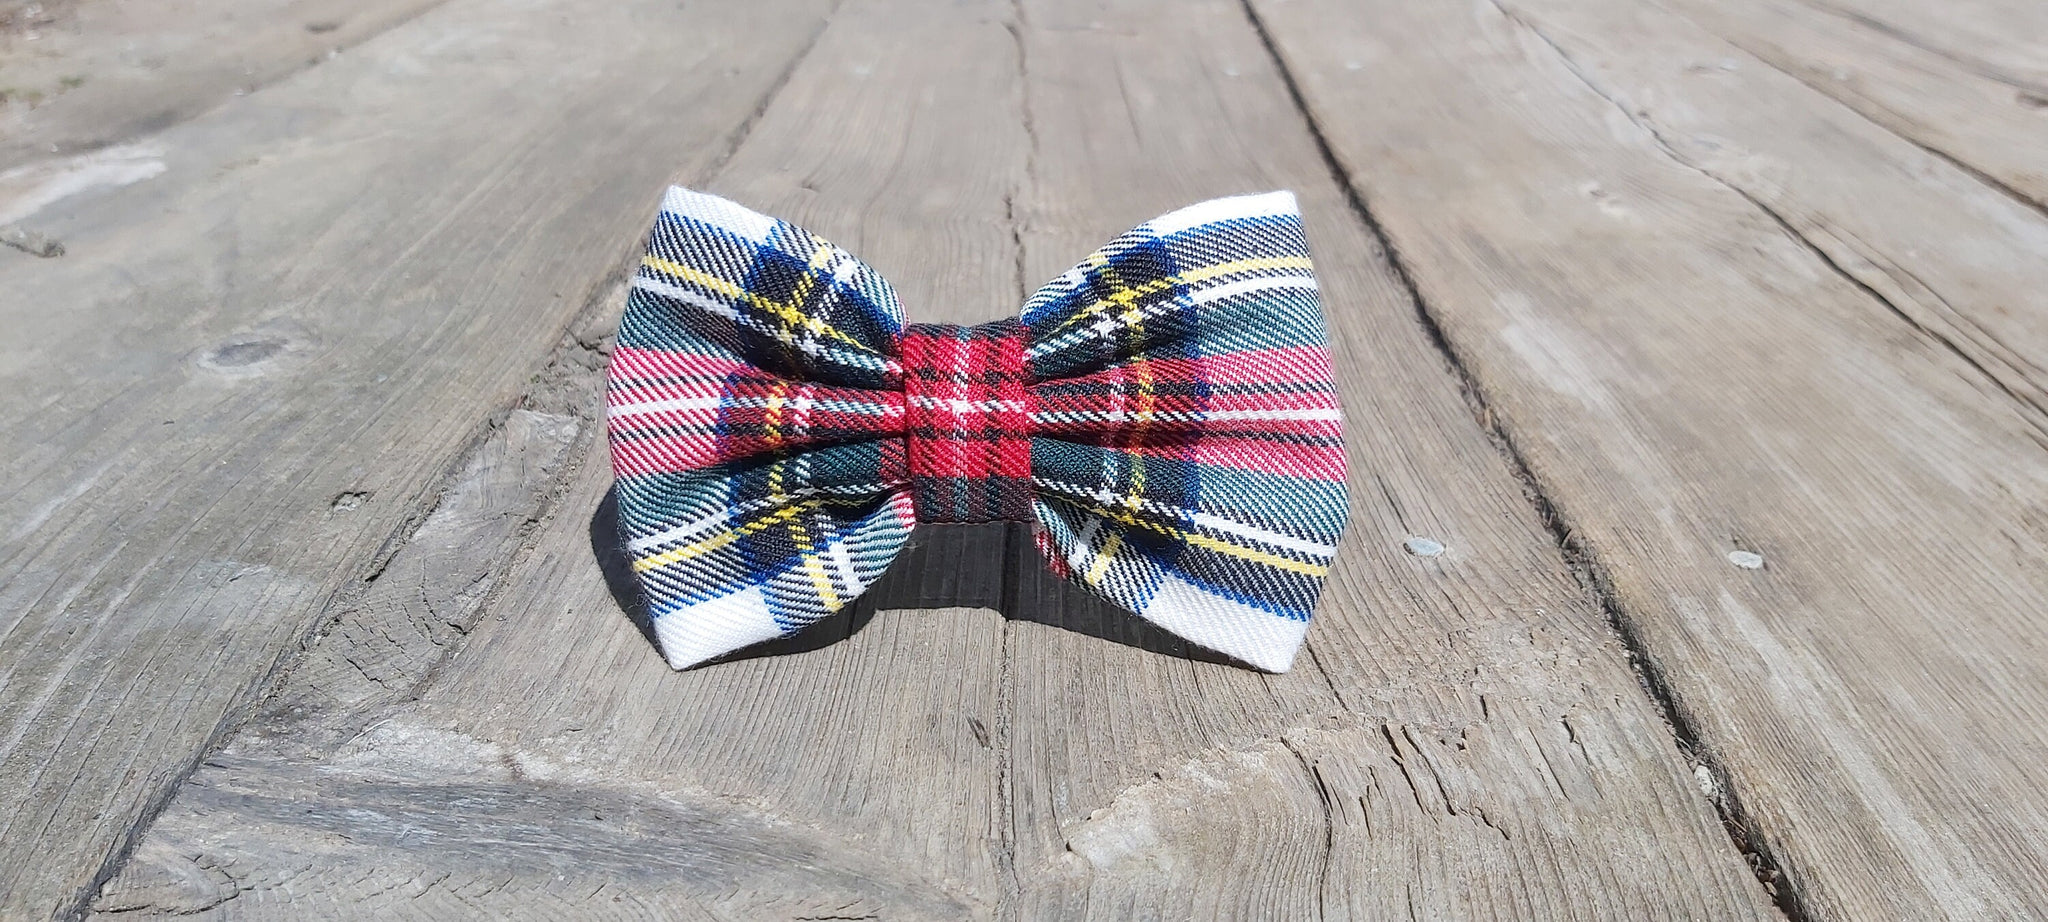 Dress Stewart Tartan Dog Bow Tie, Stewart Wedding Ring Bearer Bow Tie for Dogs, Plaid Pet Bow Ties,  Bow Tie for Birthday Dogs Photos